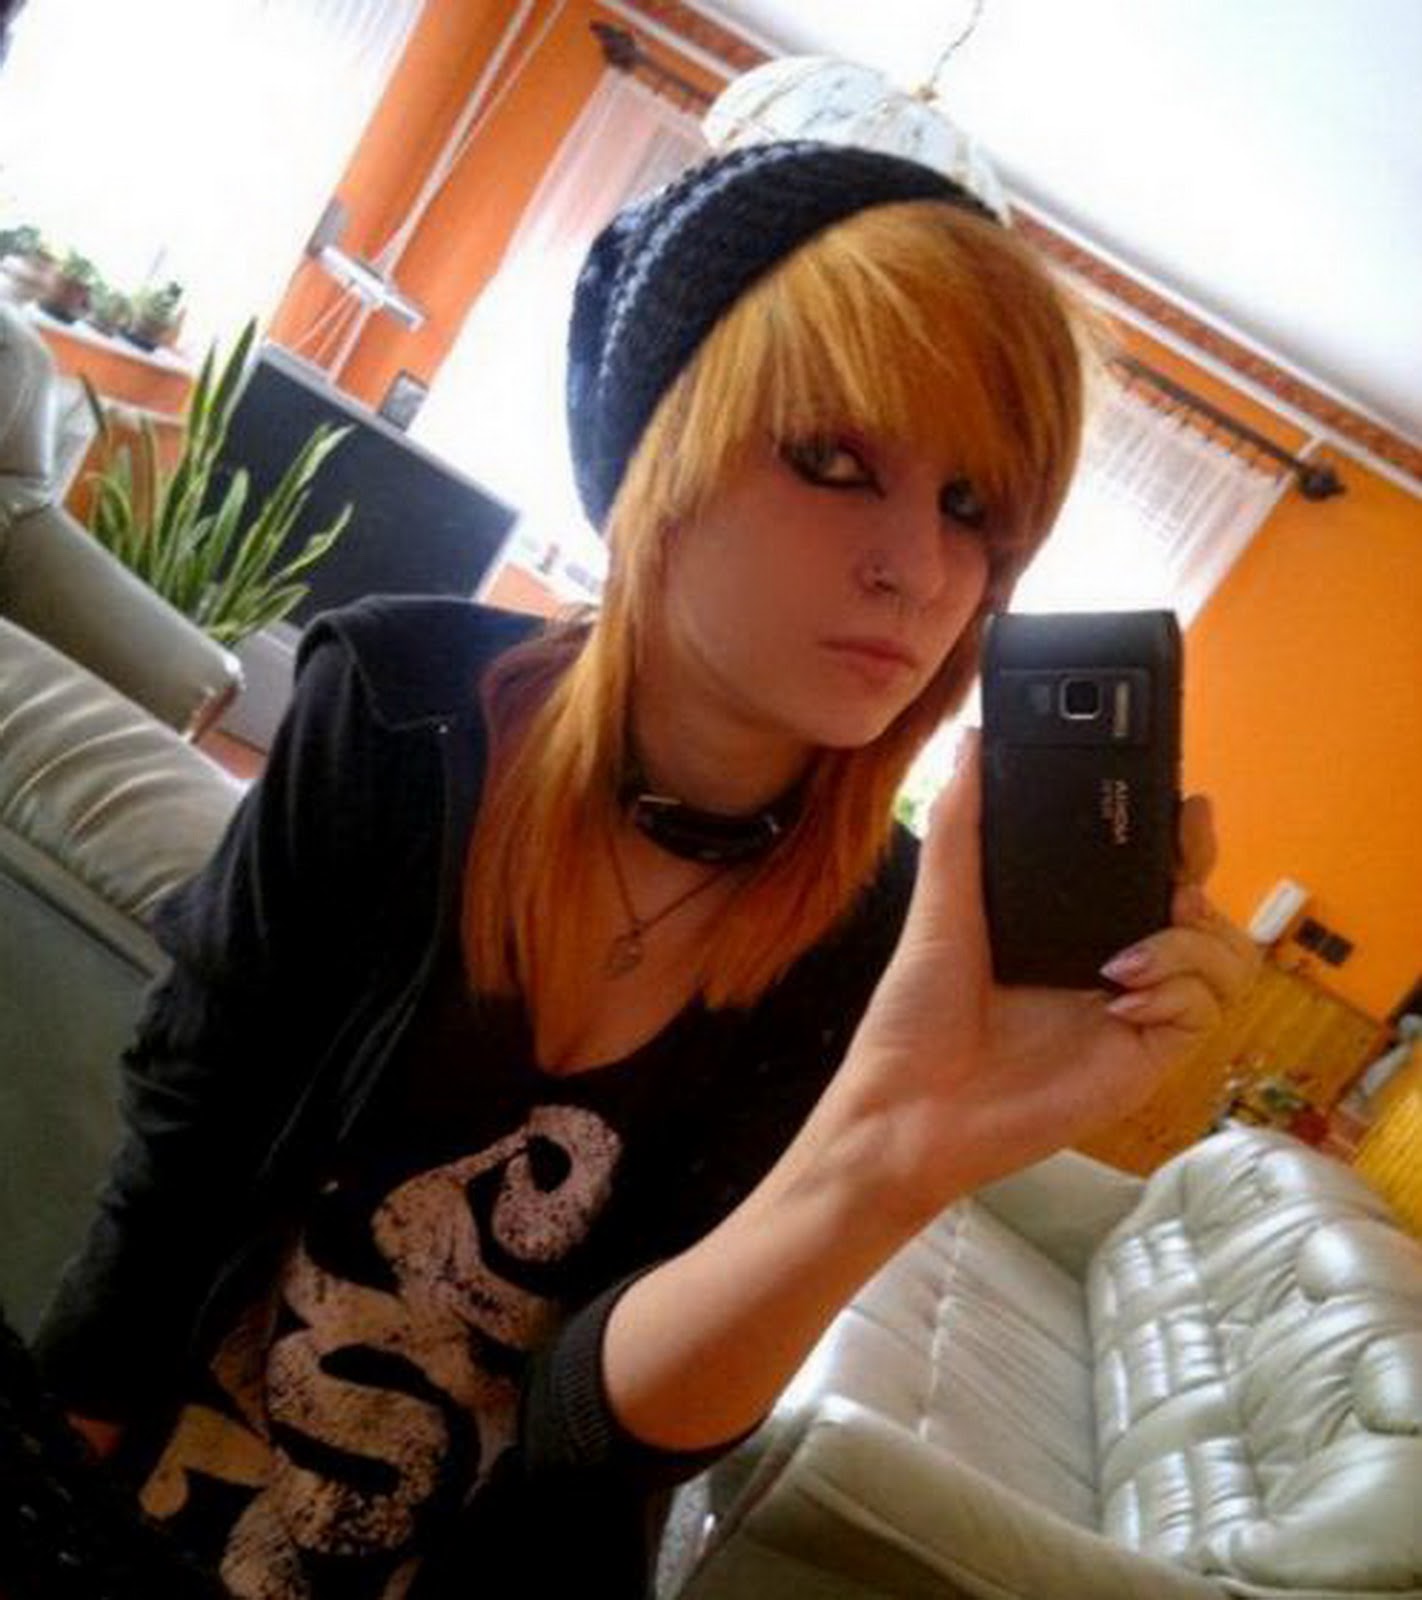 New Emo New Model Trend Hairs Girls And Boys Emo Girls Sexy